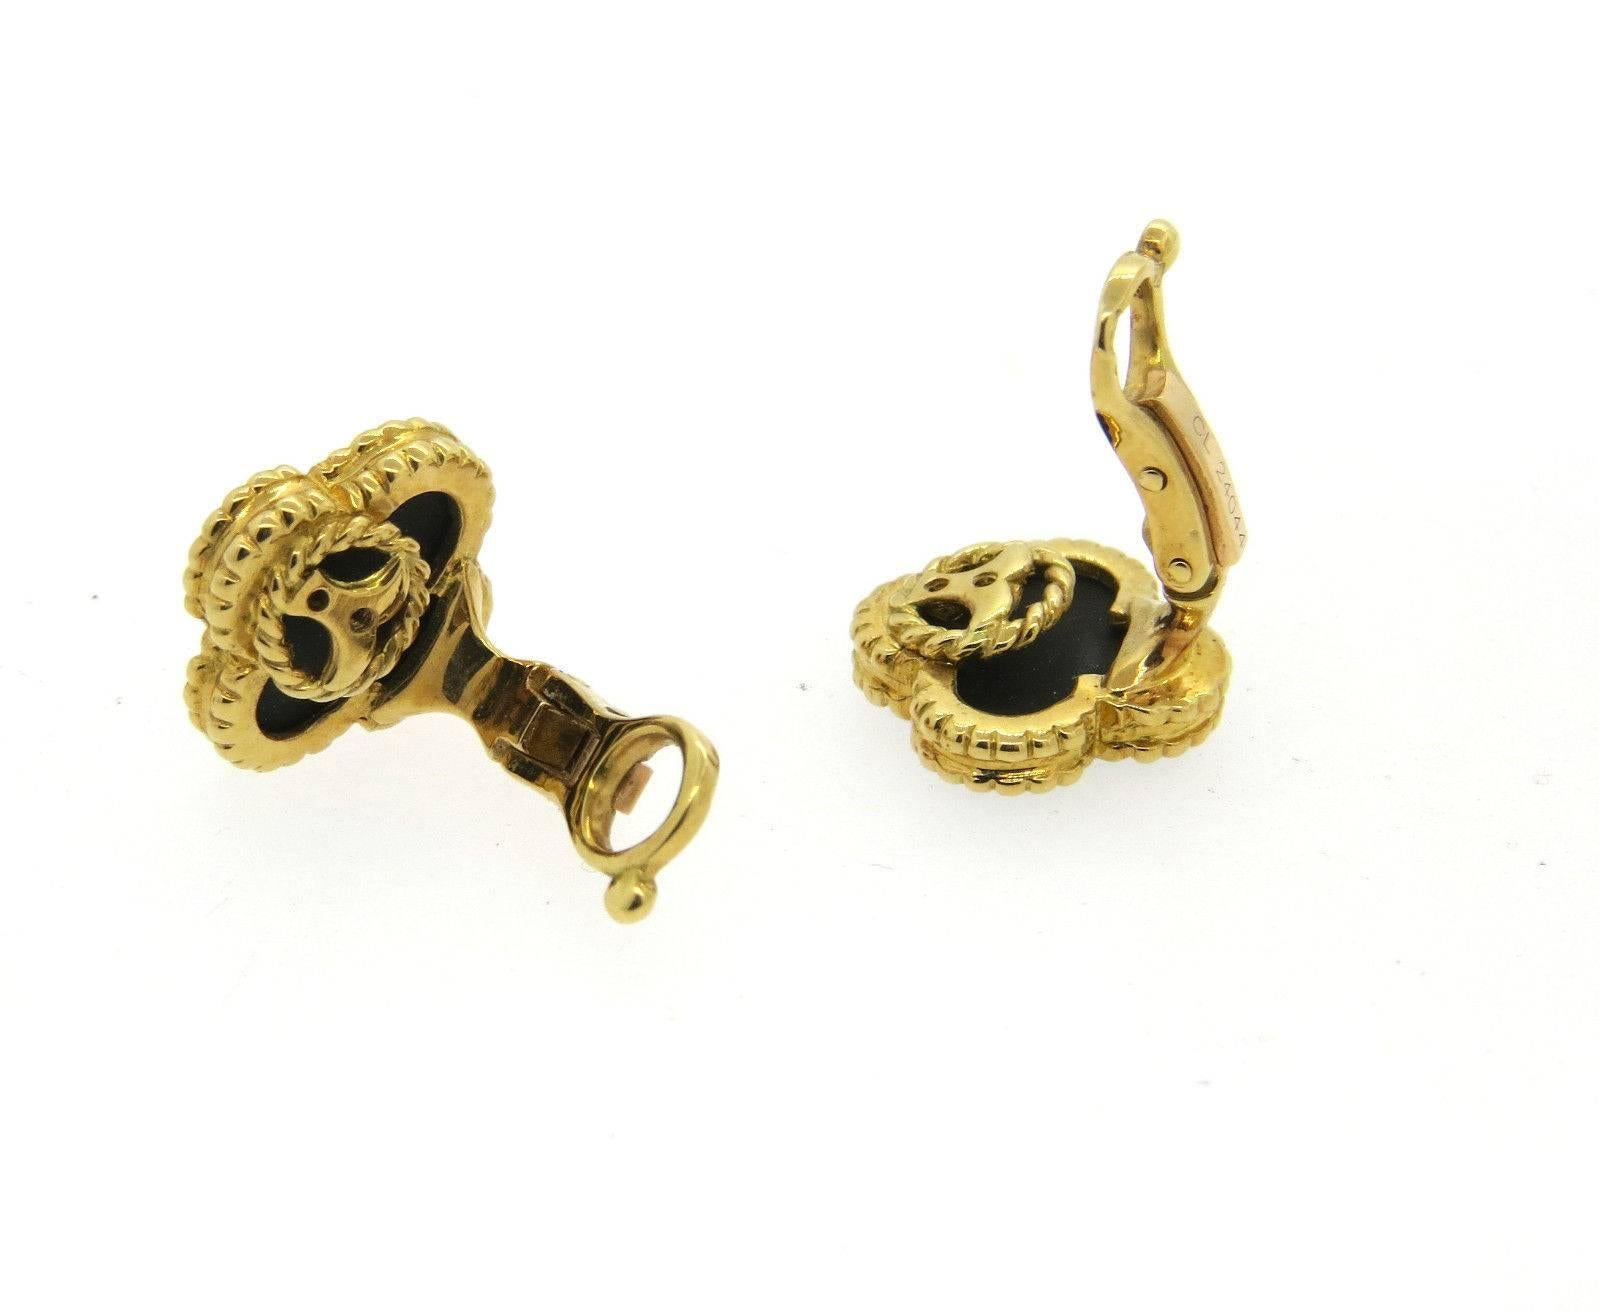 A pair of 18k yellow gold earrings set with onyx.  Crafted by Van Cleef & Arpels for their famous Vintage Alhambra collection, the earrings measure 15mm x 15mm and weigh 8.9 grams.  Marked: VCA,750,CL24044.  Retail: $4550